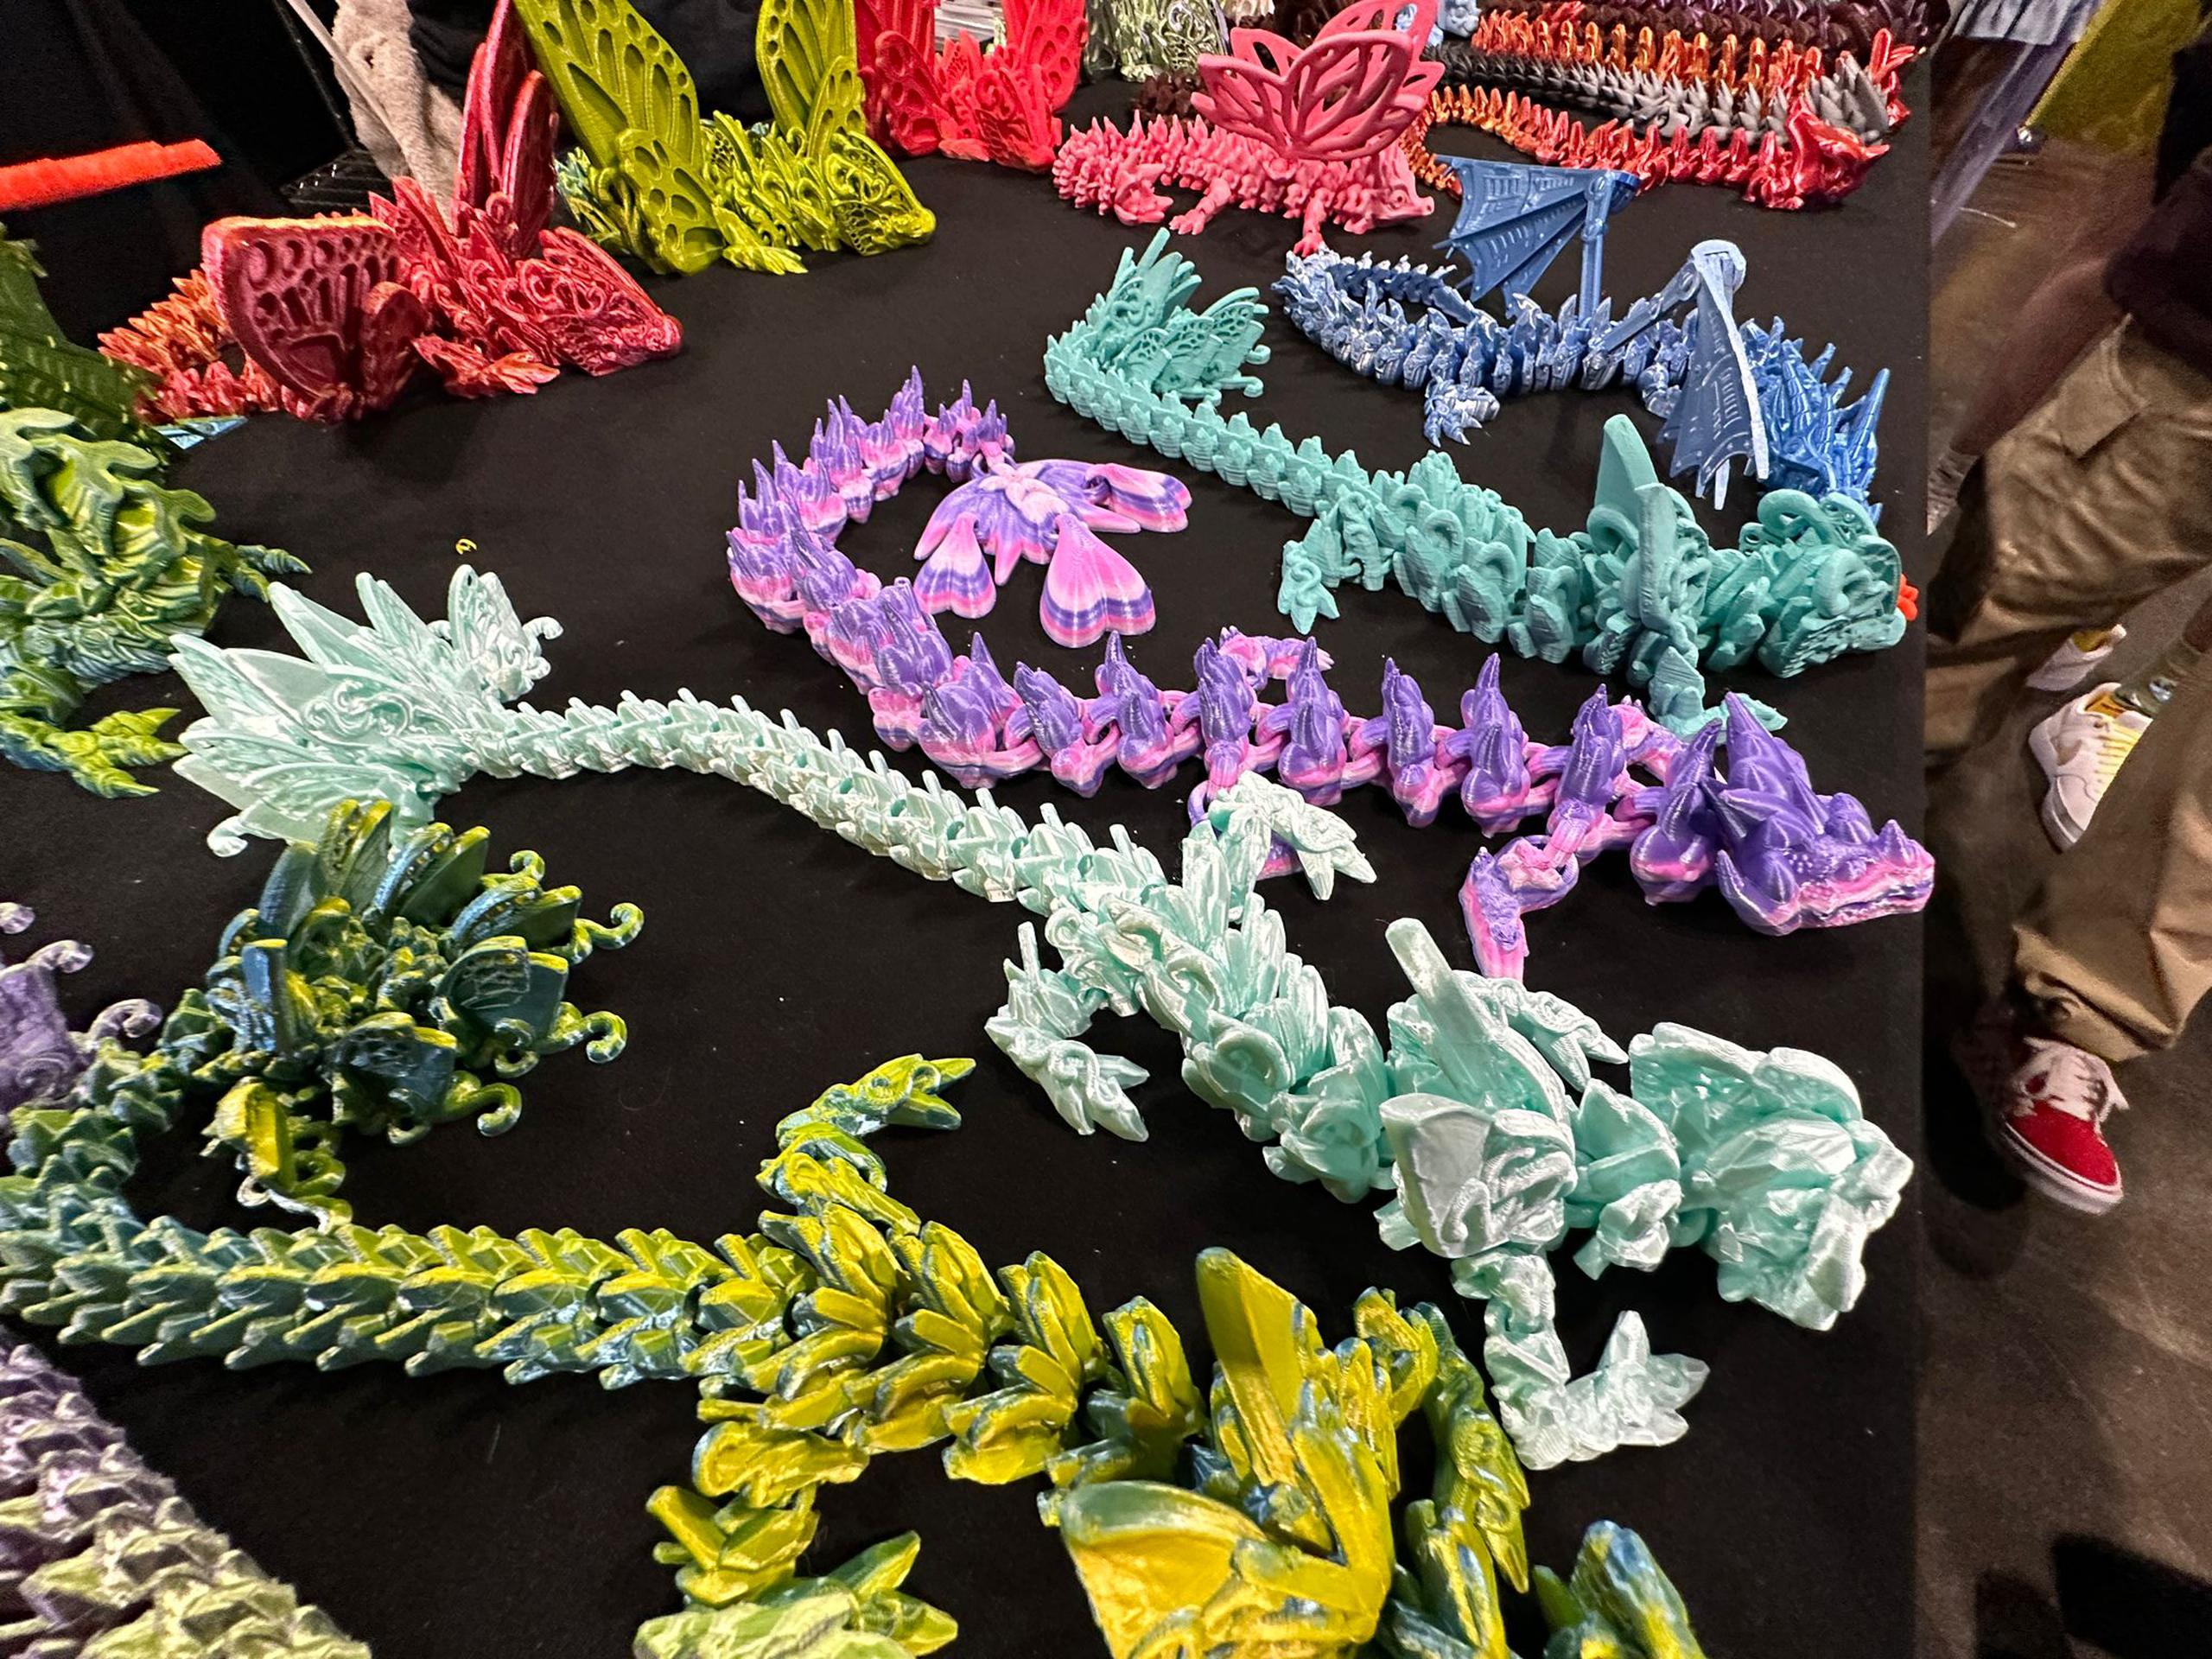 Carrillo displayed a collection of colorful dragons created with 3D printing at his station.